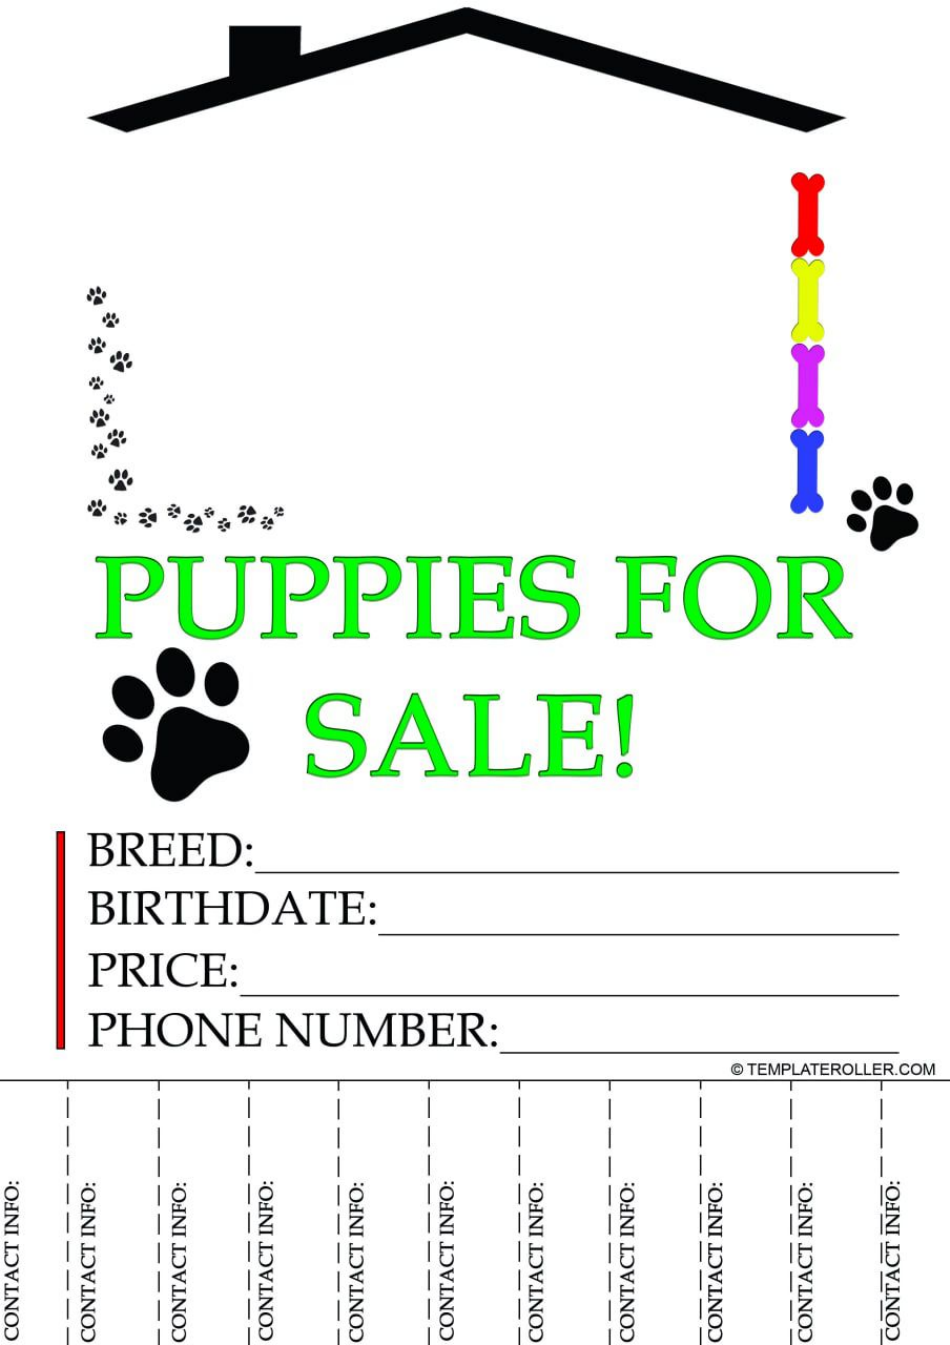 Puppies for Sale Flyer Template, Page 1